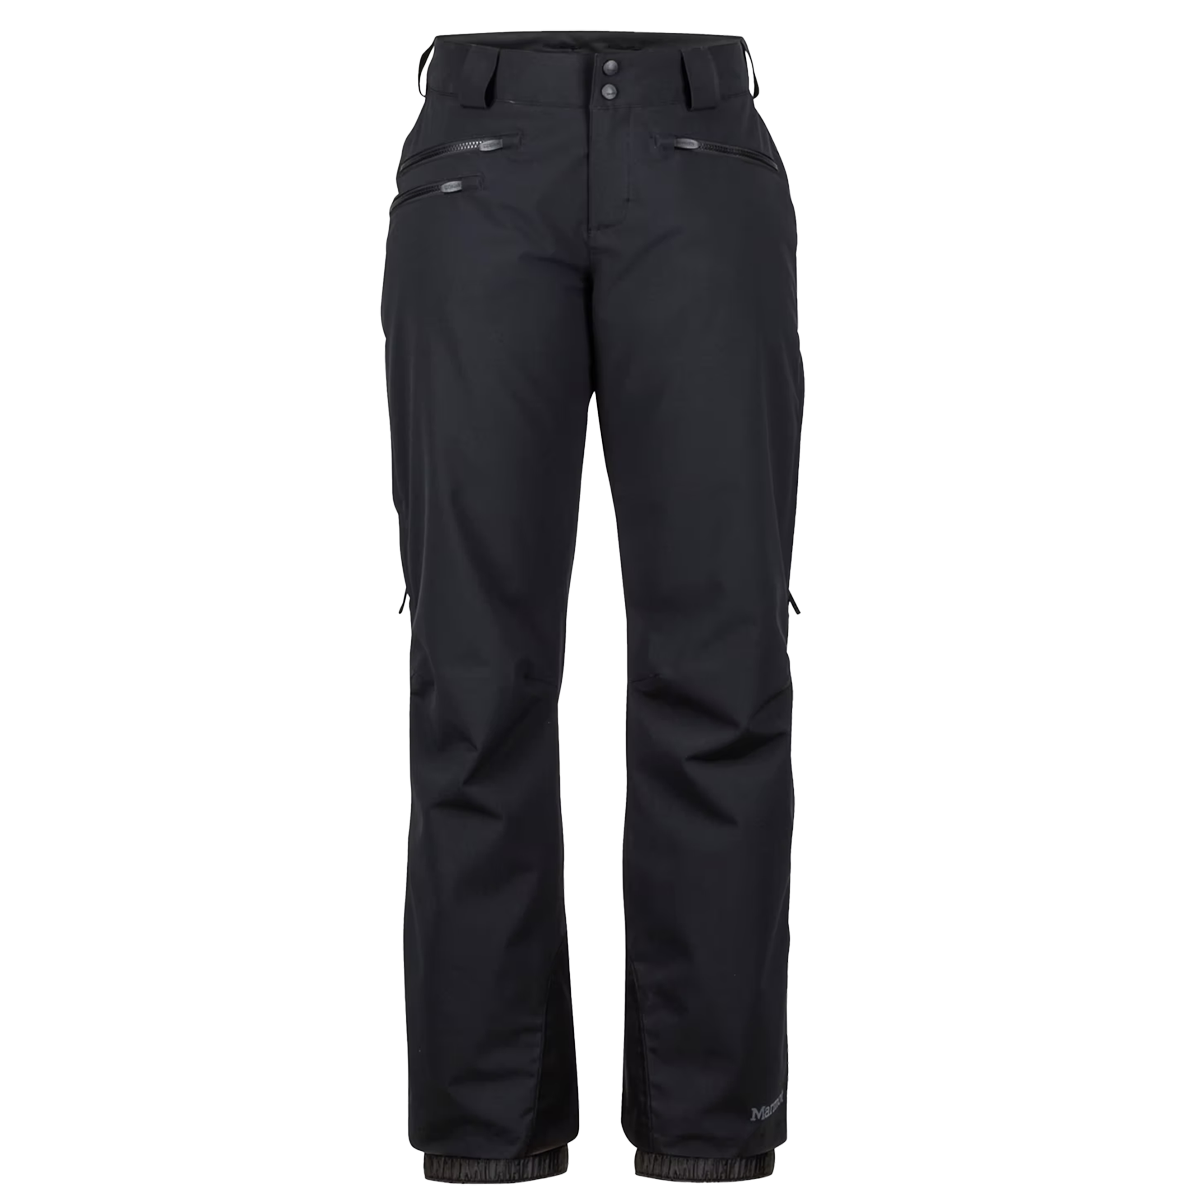 Misty Mountain Women's Size Medium Insulated Pants for Snow Sports